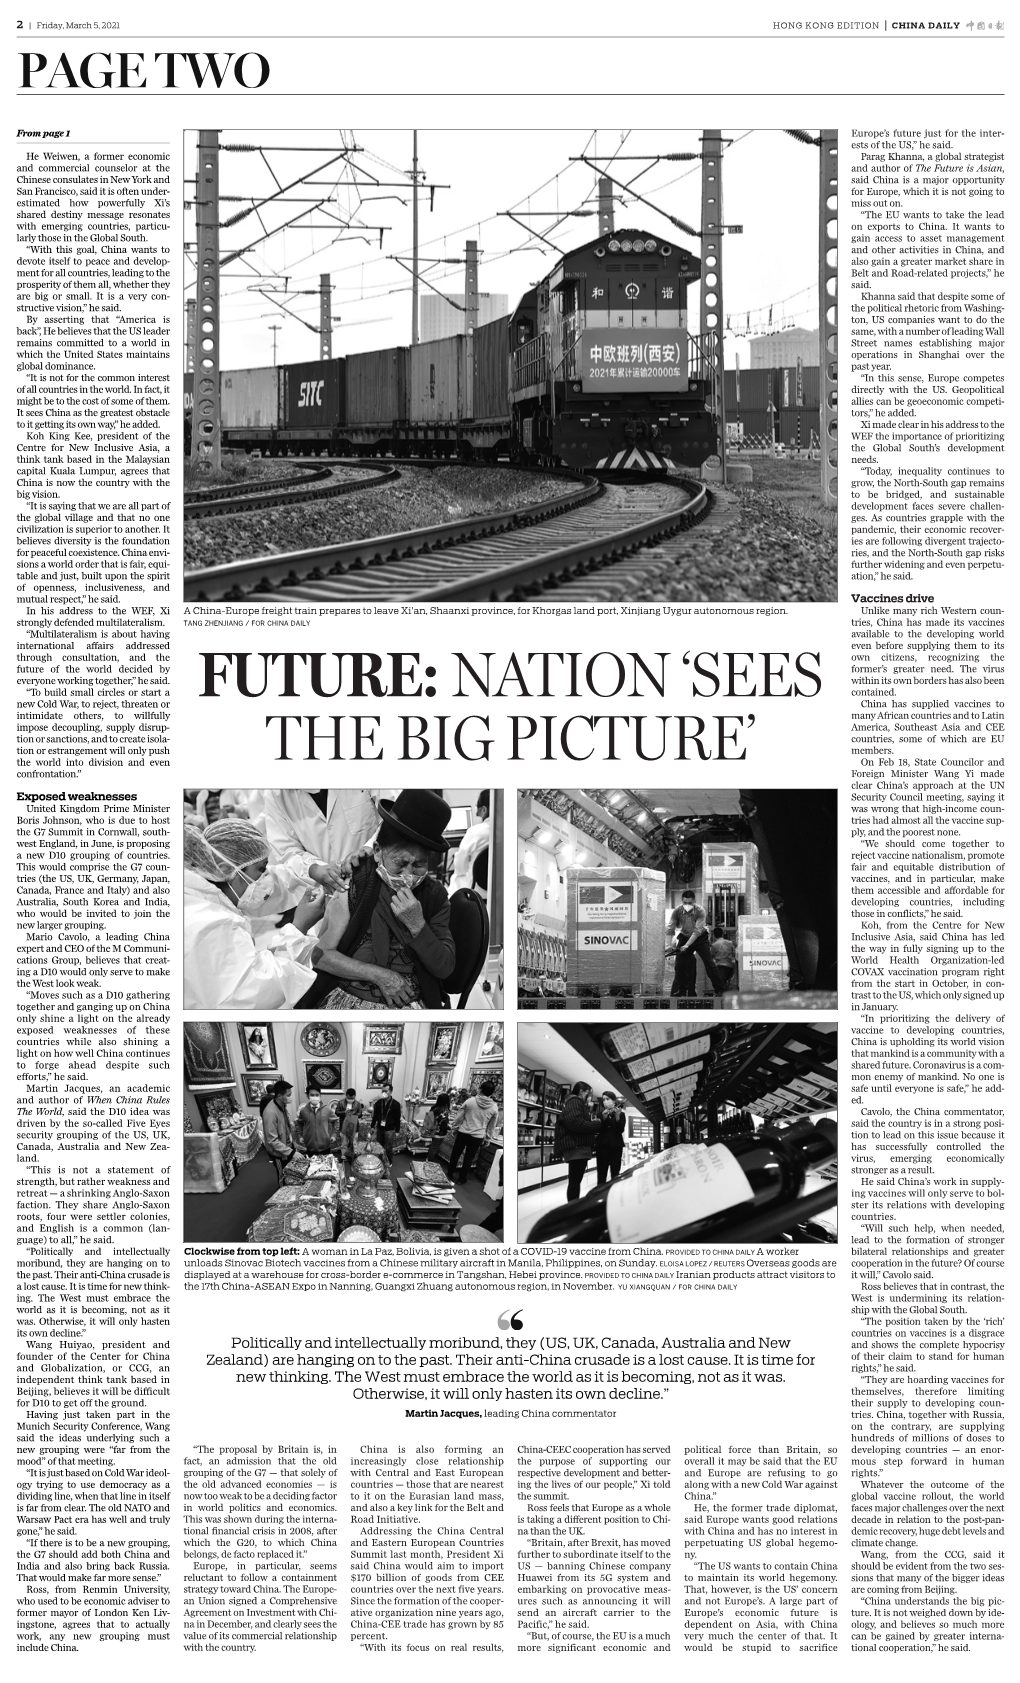 Future: Nation 'Sees the Big Picture'